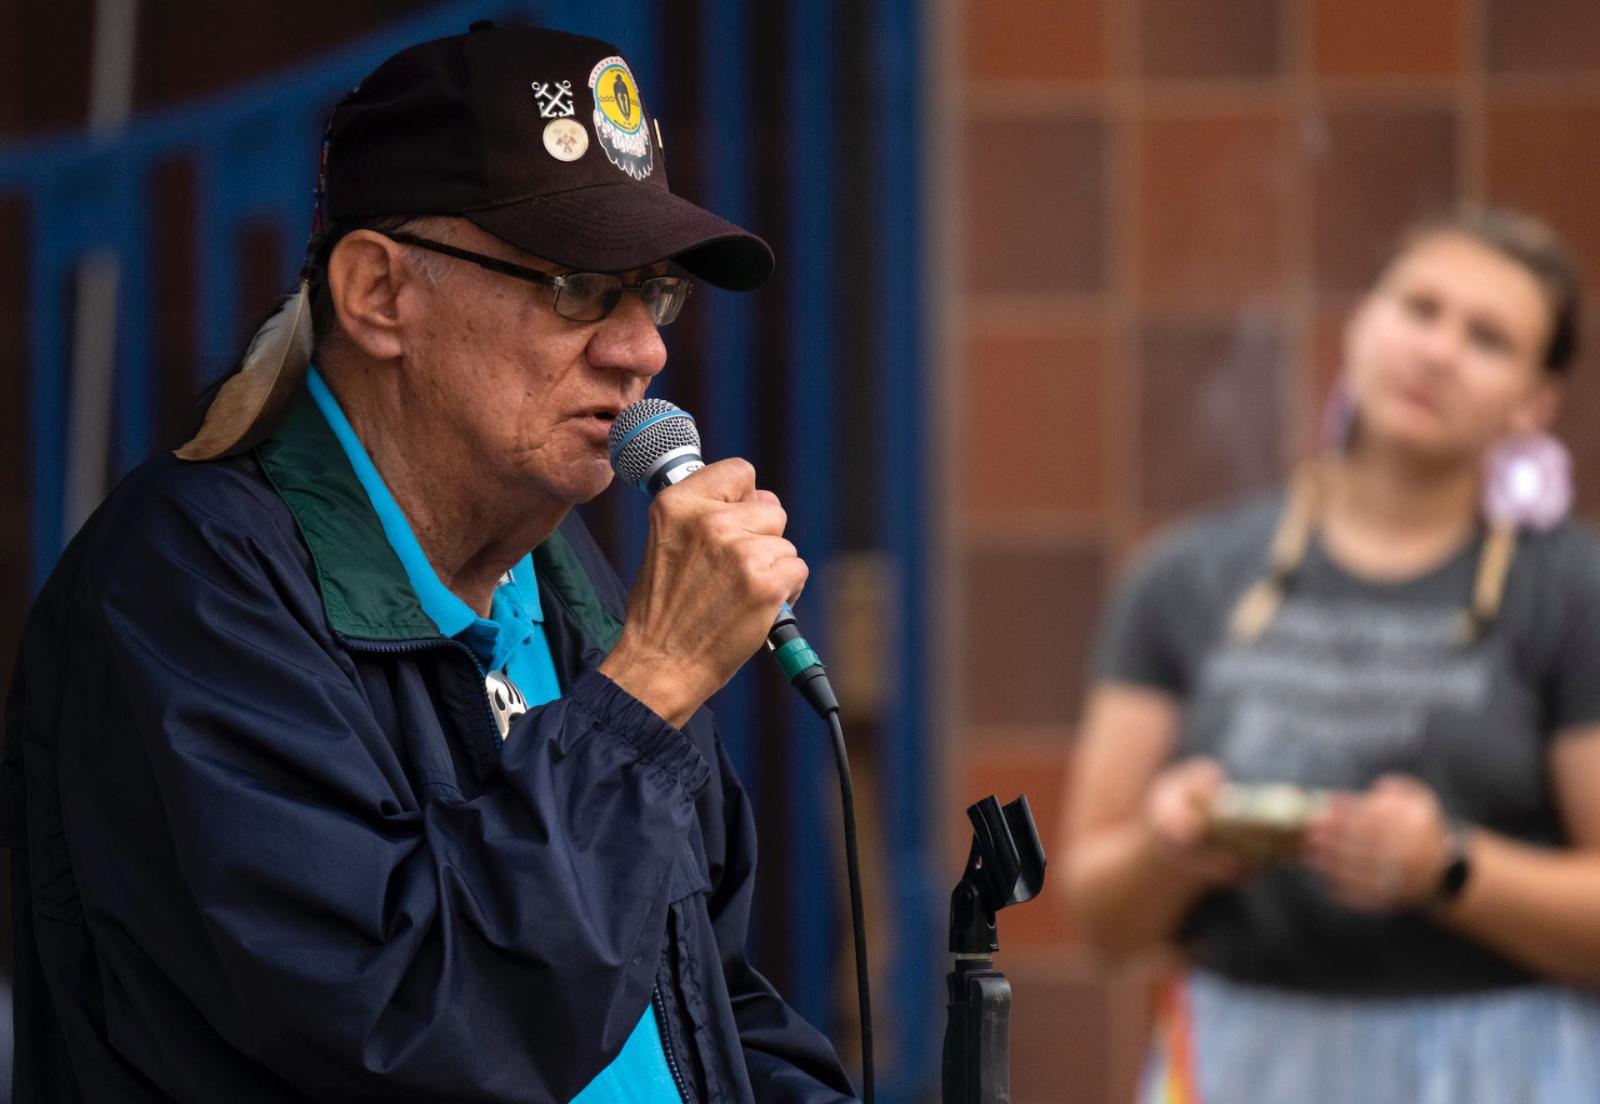 Dennis Kenote, a Menominee elder speaks with microphone in hand during Lawrence's celebration of Indigenous Peoples' Day.